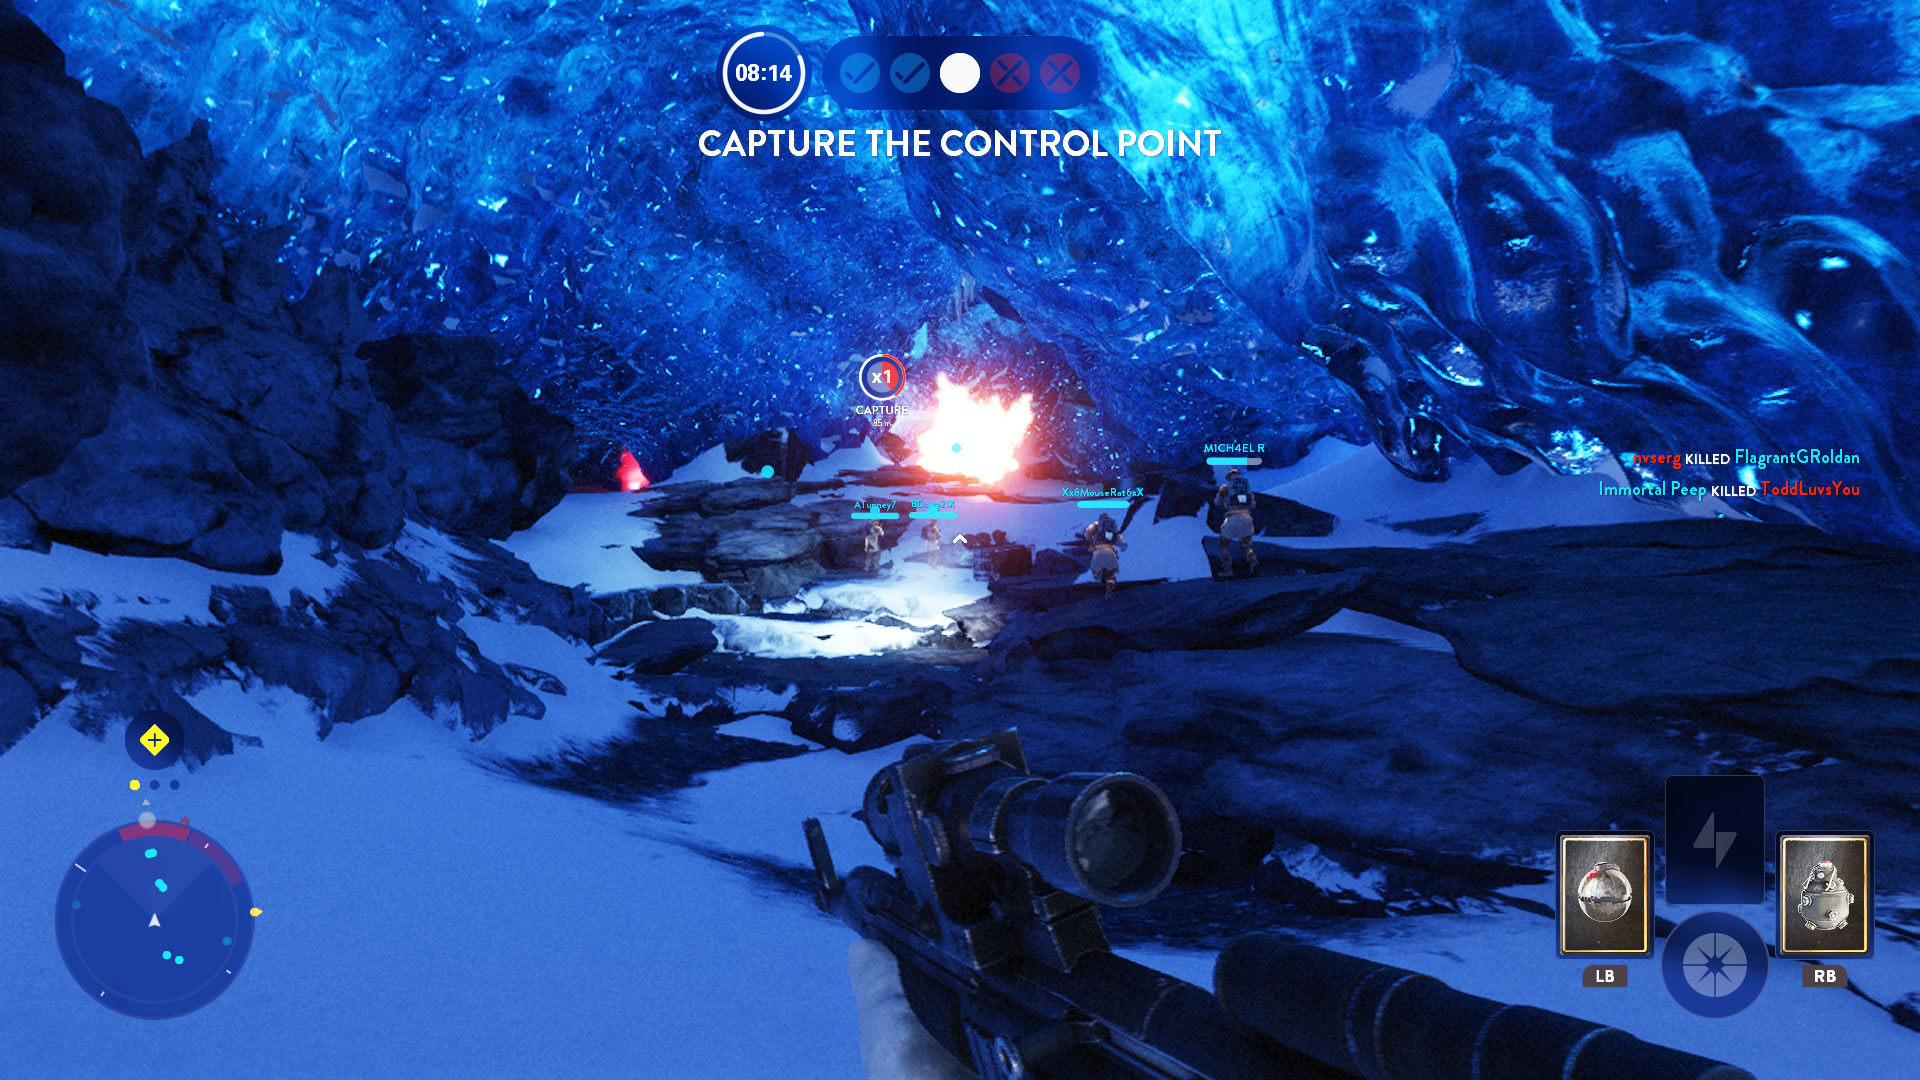 Star Wars Battlefront Only Lacked Launch Content